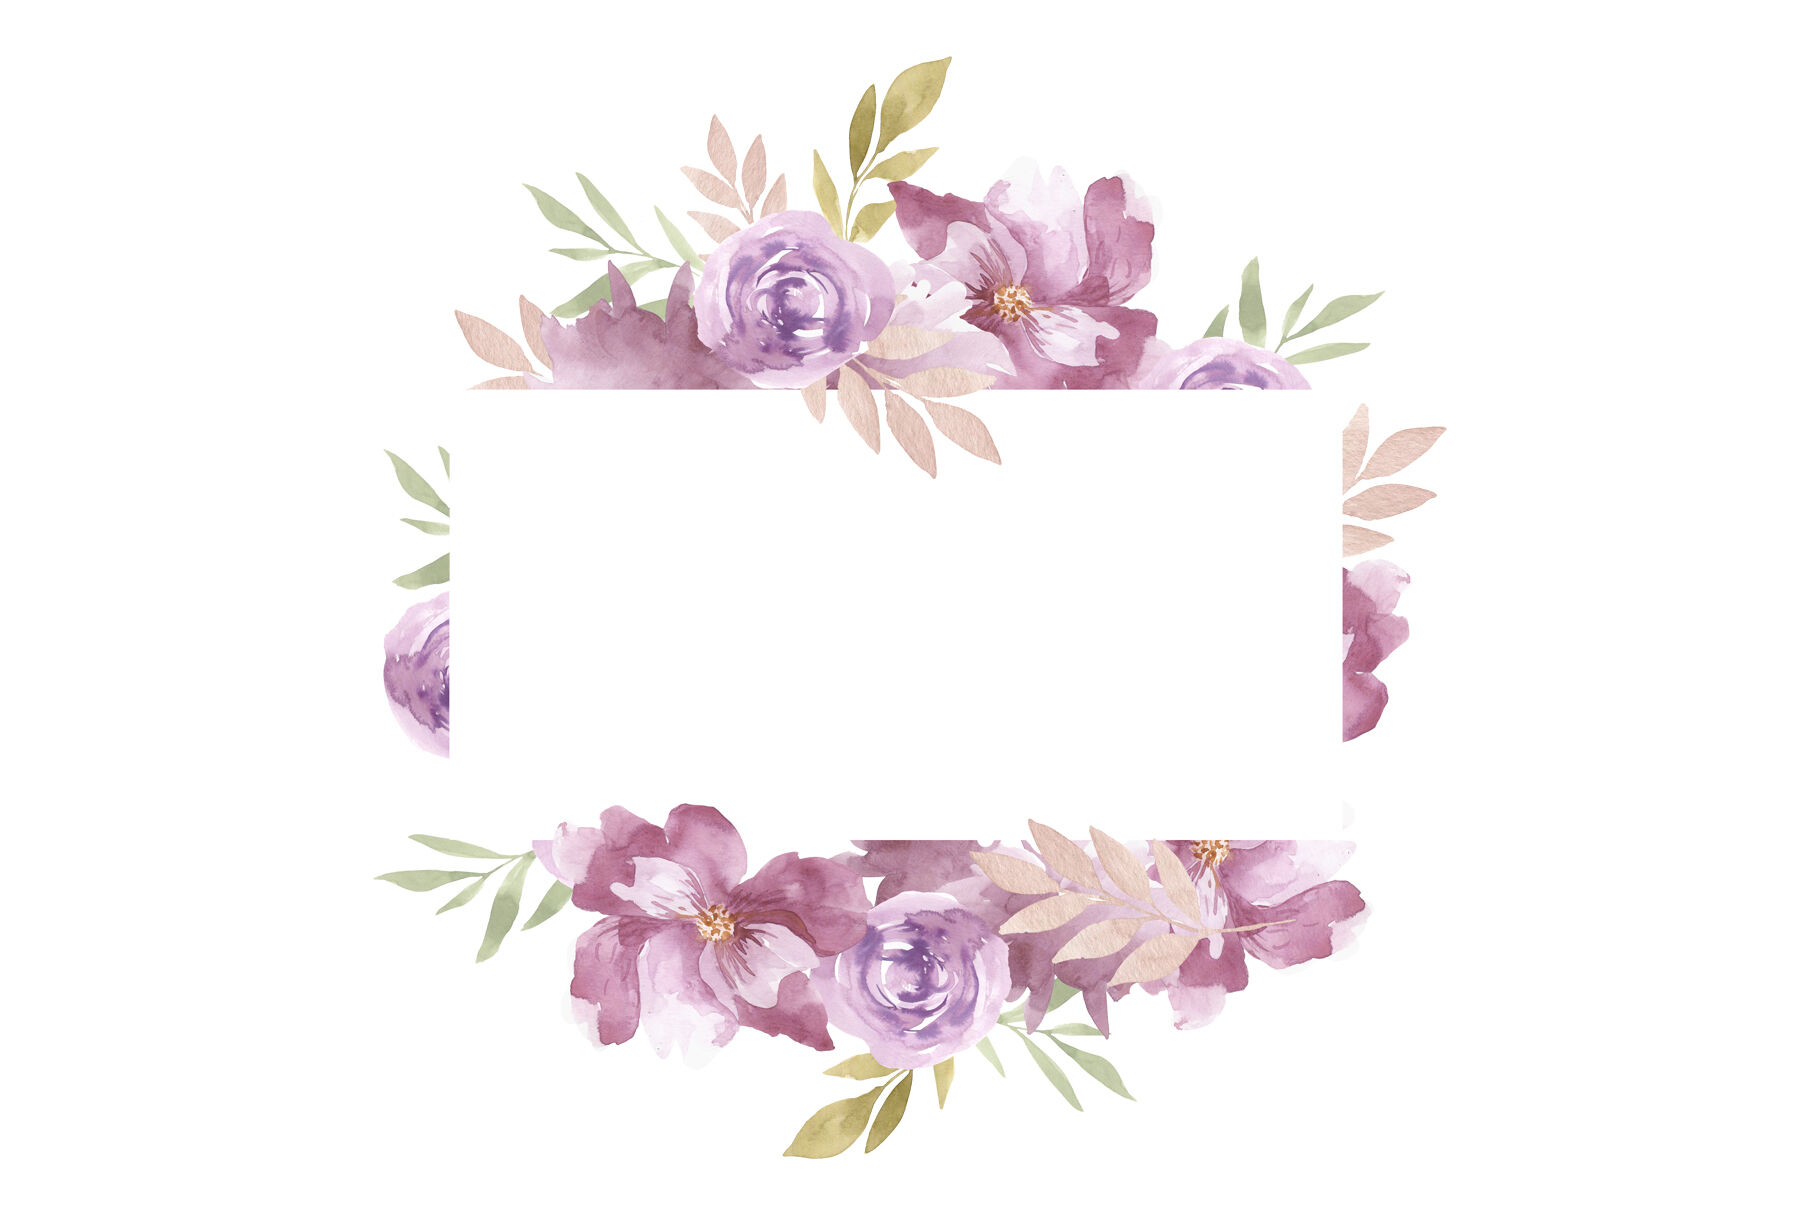 Floral Watercolor Clipart Frames And Wreaths, Roses Frame, Botanical By Artmaslyanaya | Thehungryjpeg.com